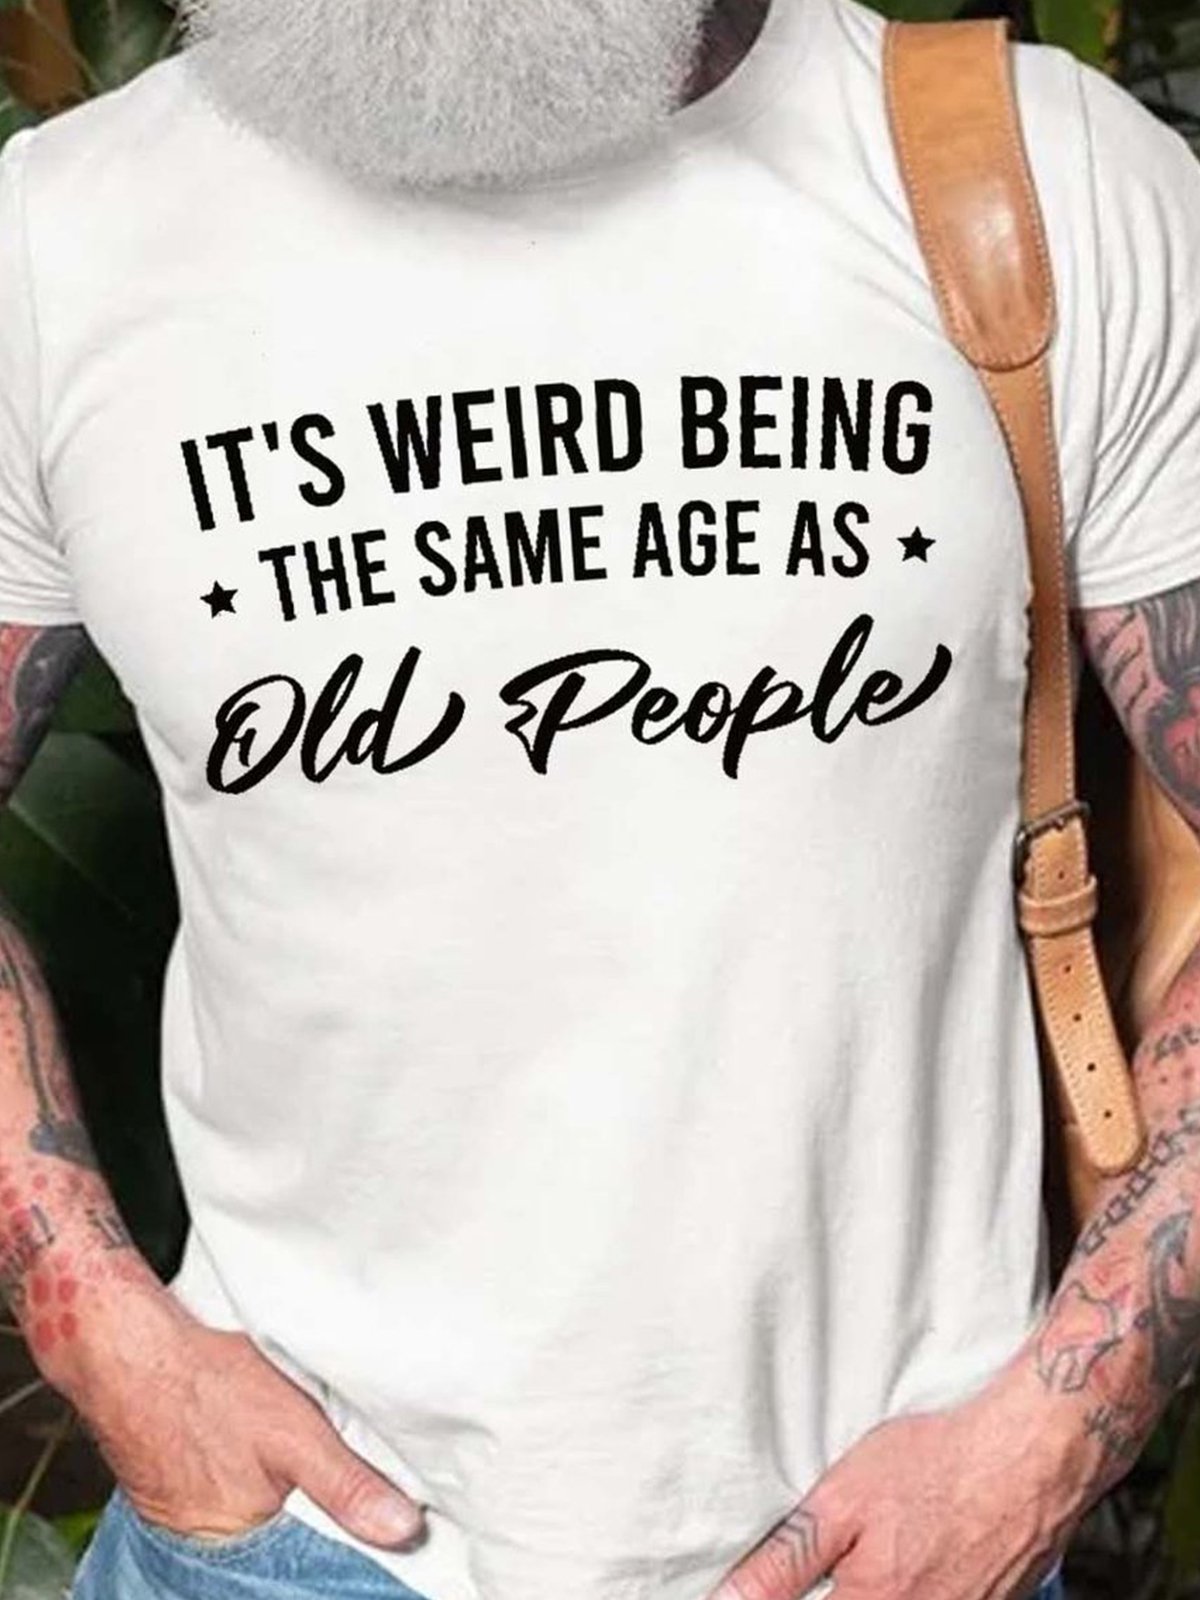 It's Weird Being the Same Age as Old People Men's Short Sleeve Crew Neck Shirts & Tops